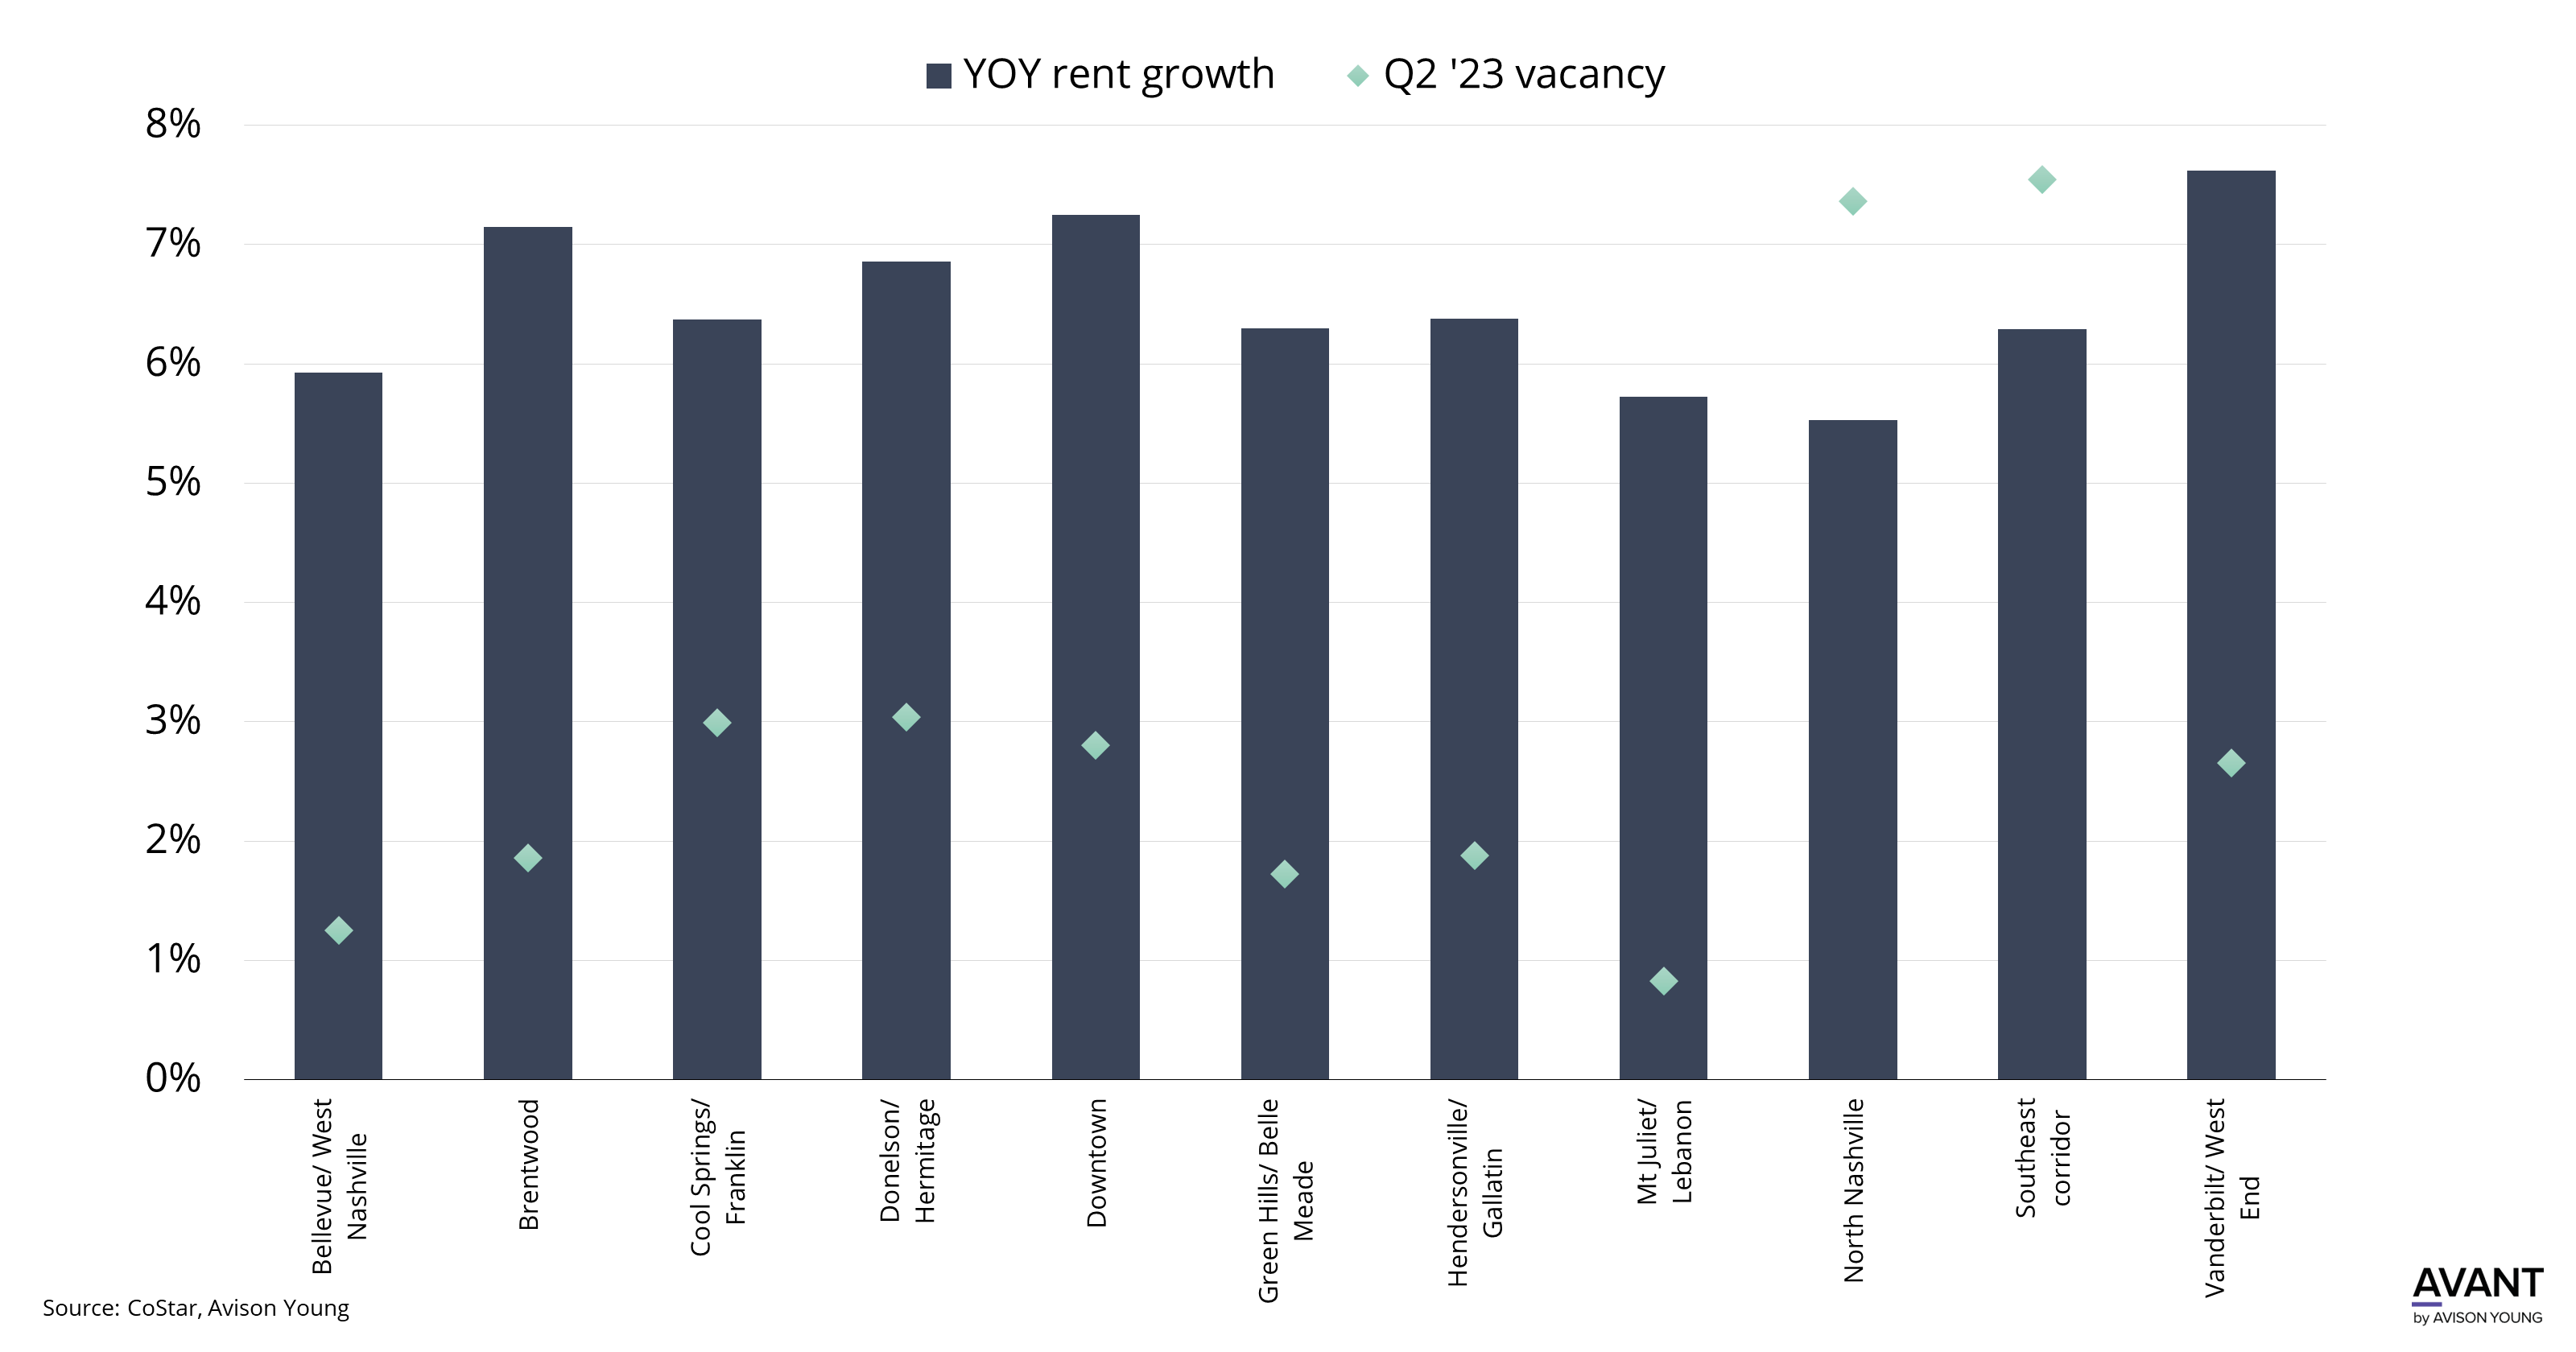 Bar chart of Nashville YOY percent rent growth and vacancy by submarket